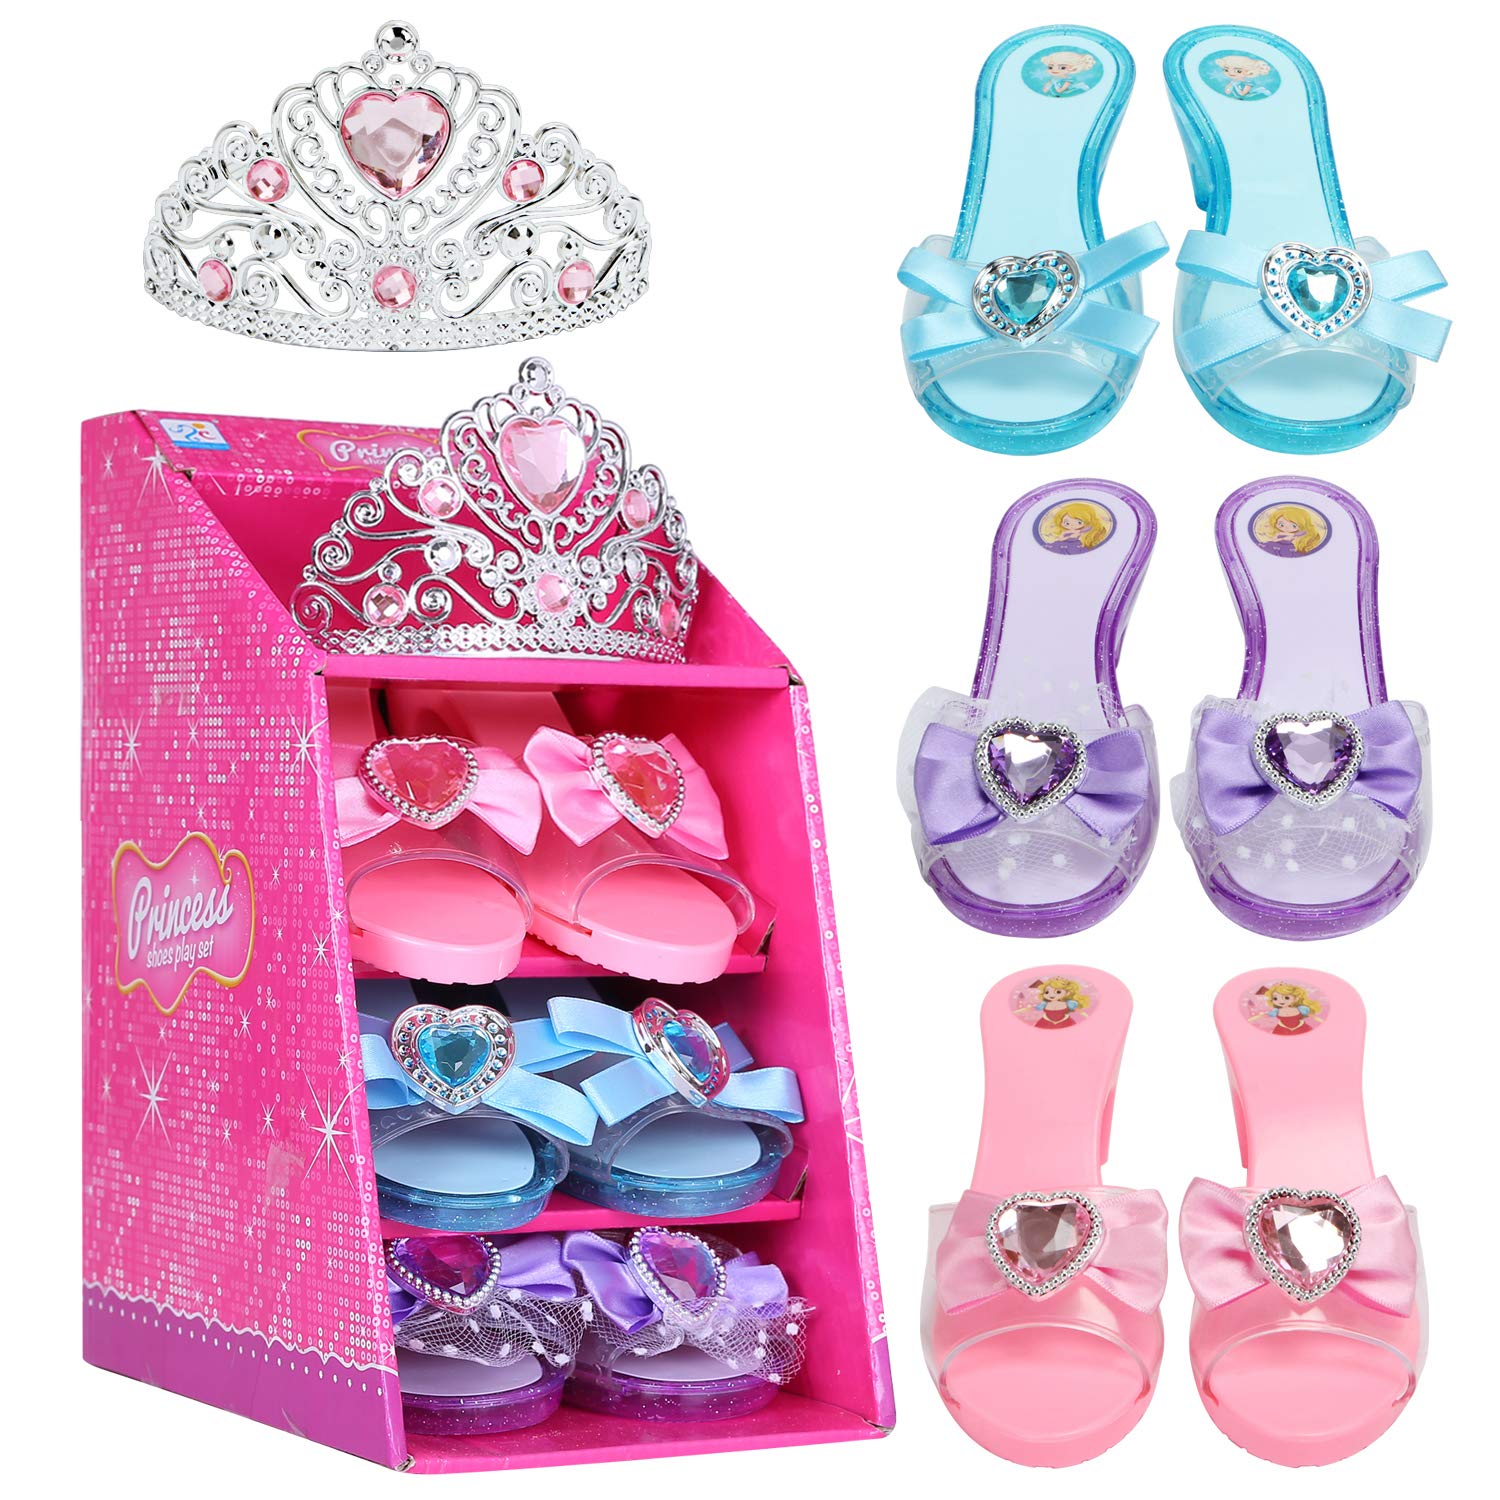 Mastom Girls Play Set! Princess Dress Up Shoes and Tiara (3 Pairs of Shoes + 1 Tiara) Role Play Collection Fashion Princess Shoes for Little Girls